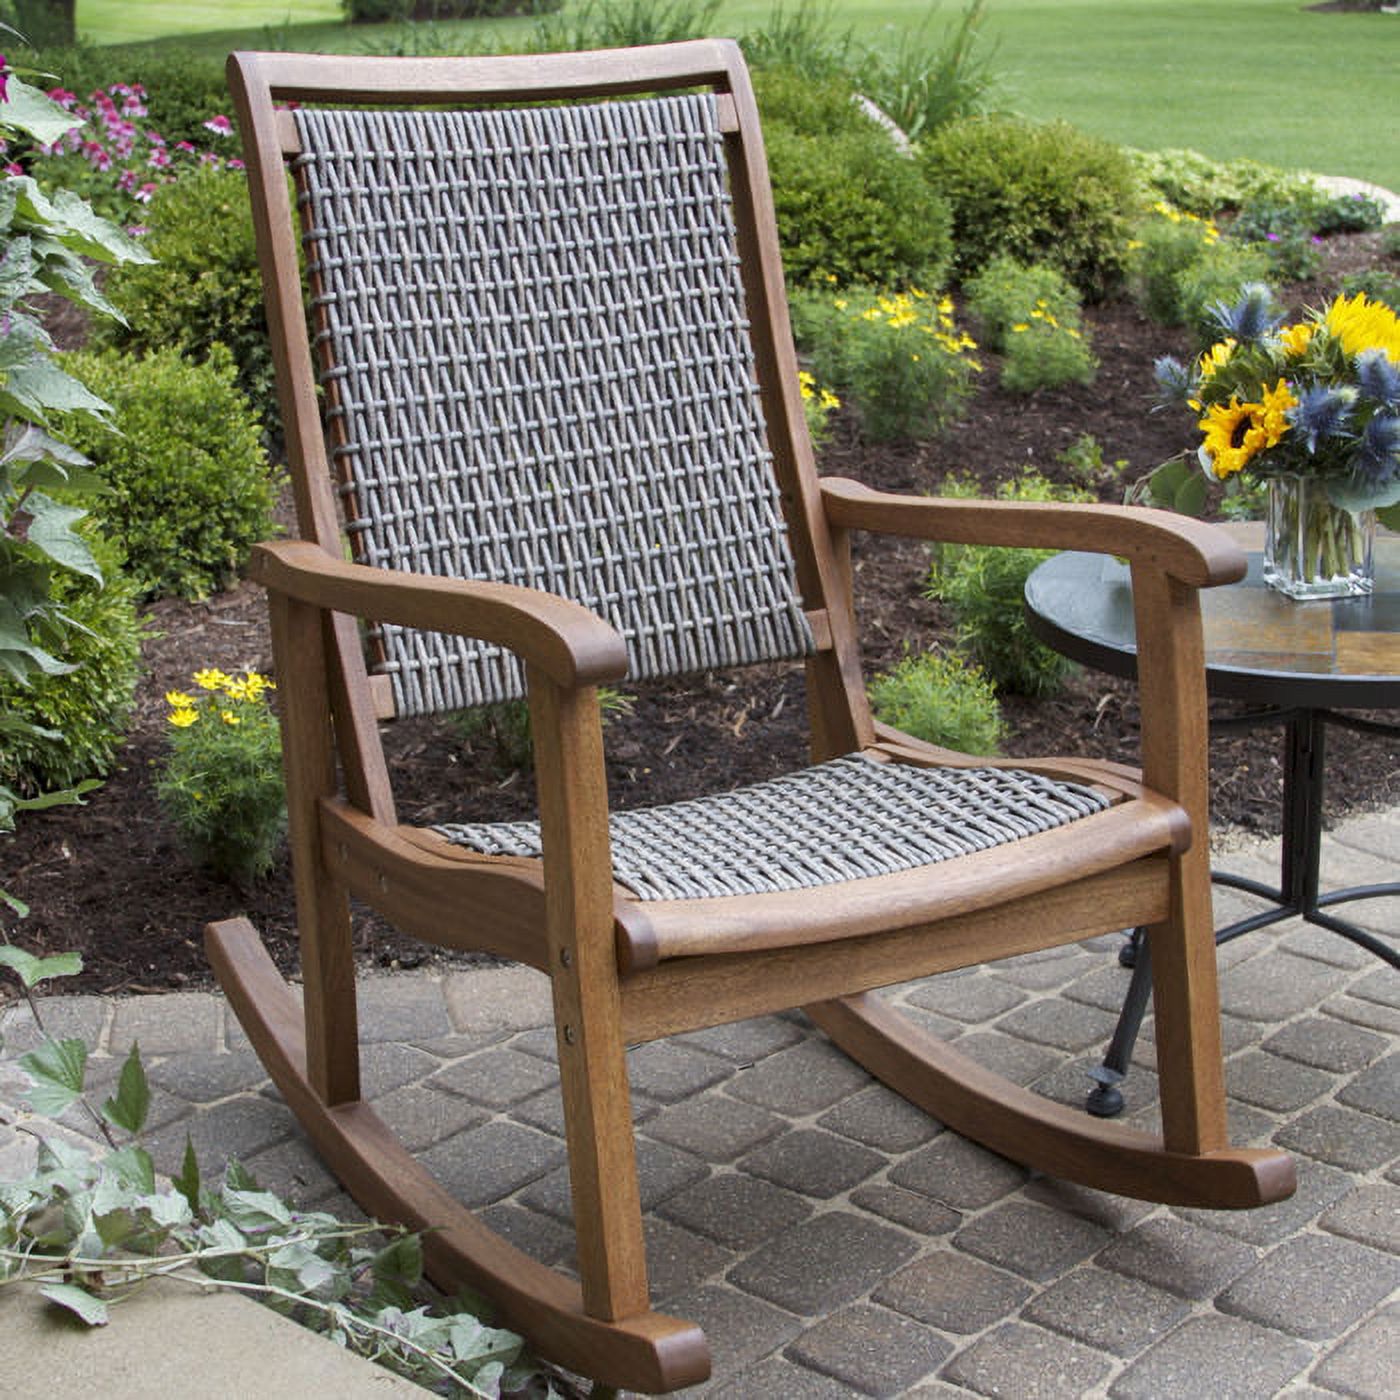 Outdoor Interiors Resin Wicker and Eucalyptus Rocking Chair, Brown and Grey - image 3 of 4